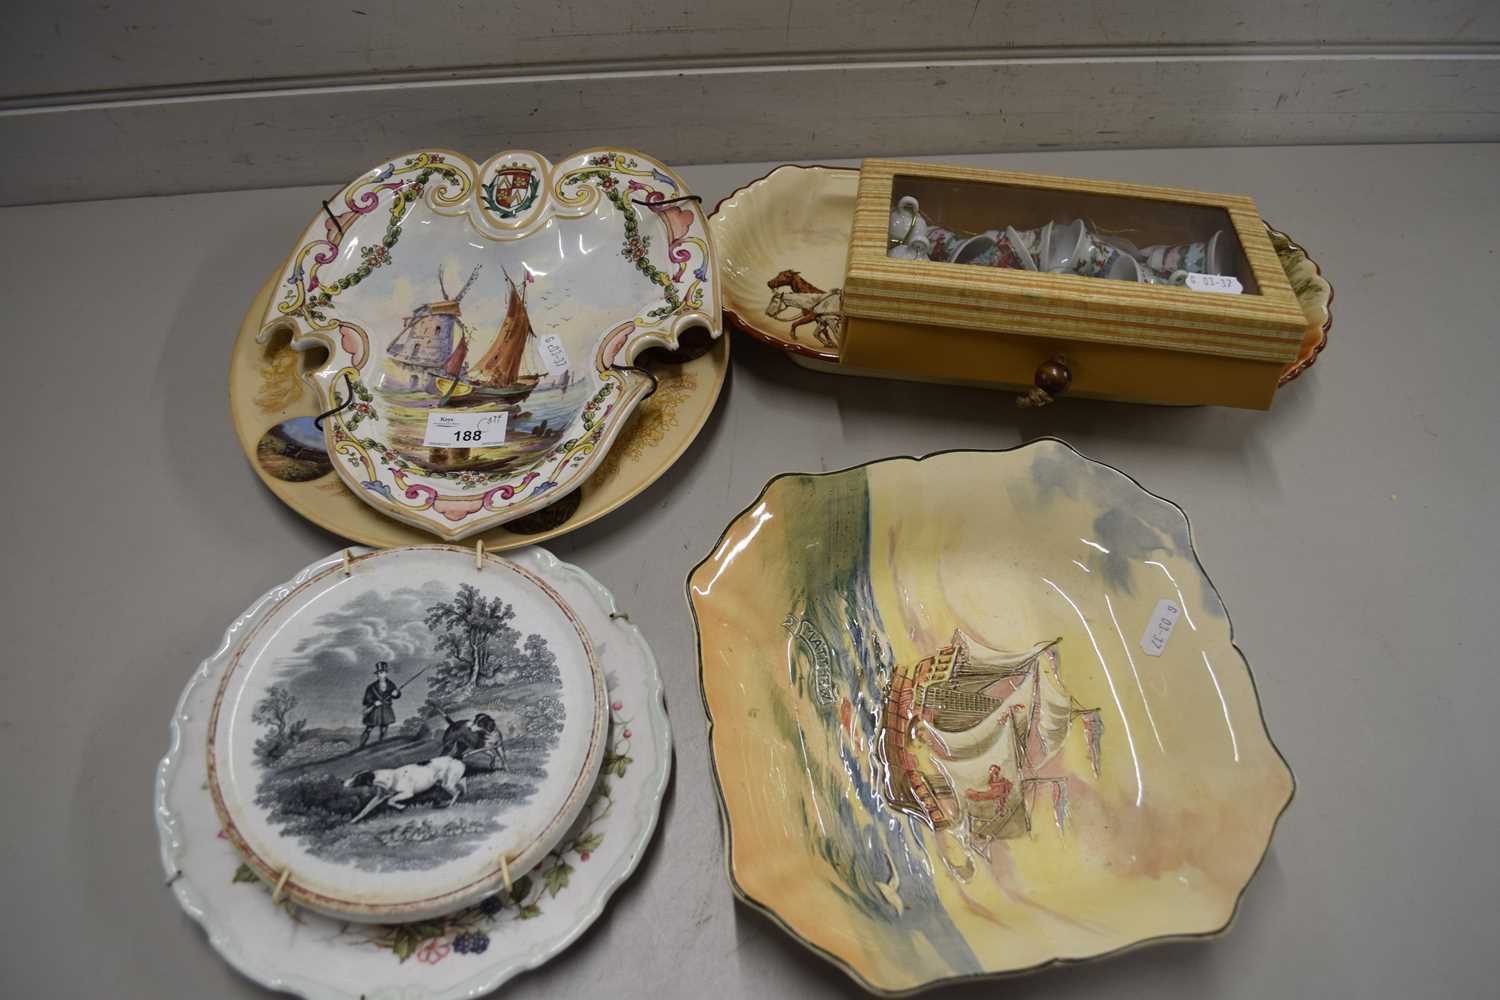 MIXED LOT : DOULTON FAMOUS SHIPS BOWL, A DOULTON SIR ROGER DE COVERLEY OVAL DISH PLUS VARIOUS OTHERS